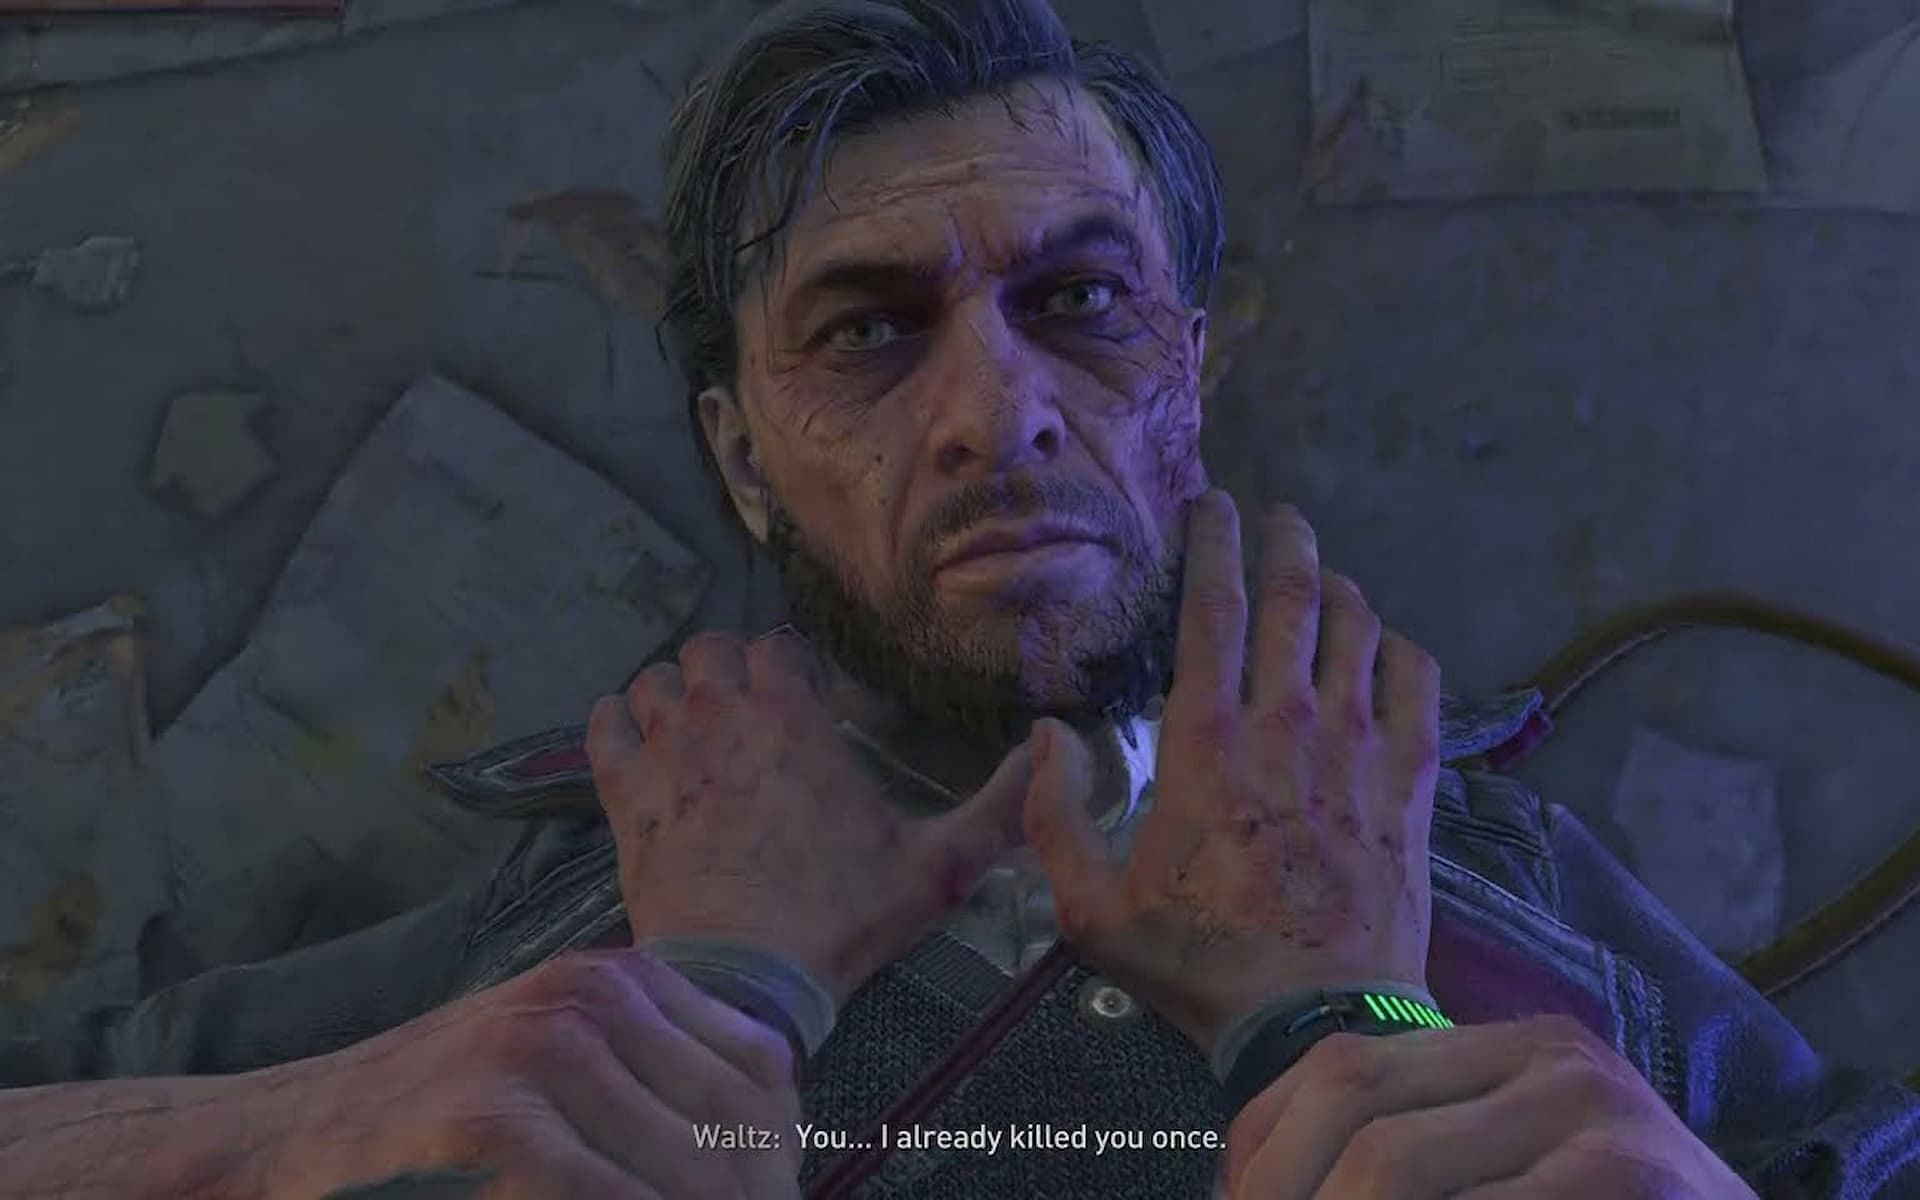 dying light main character